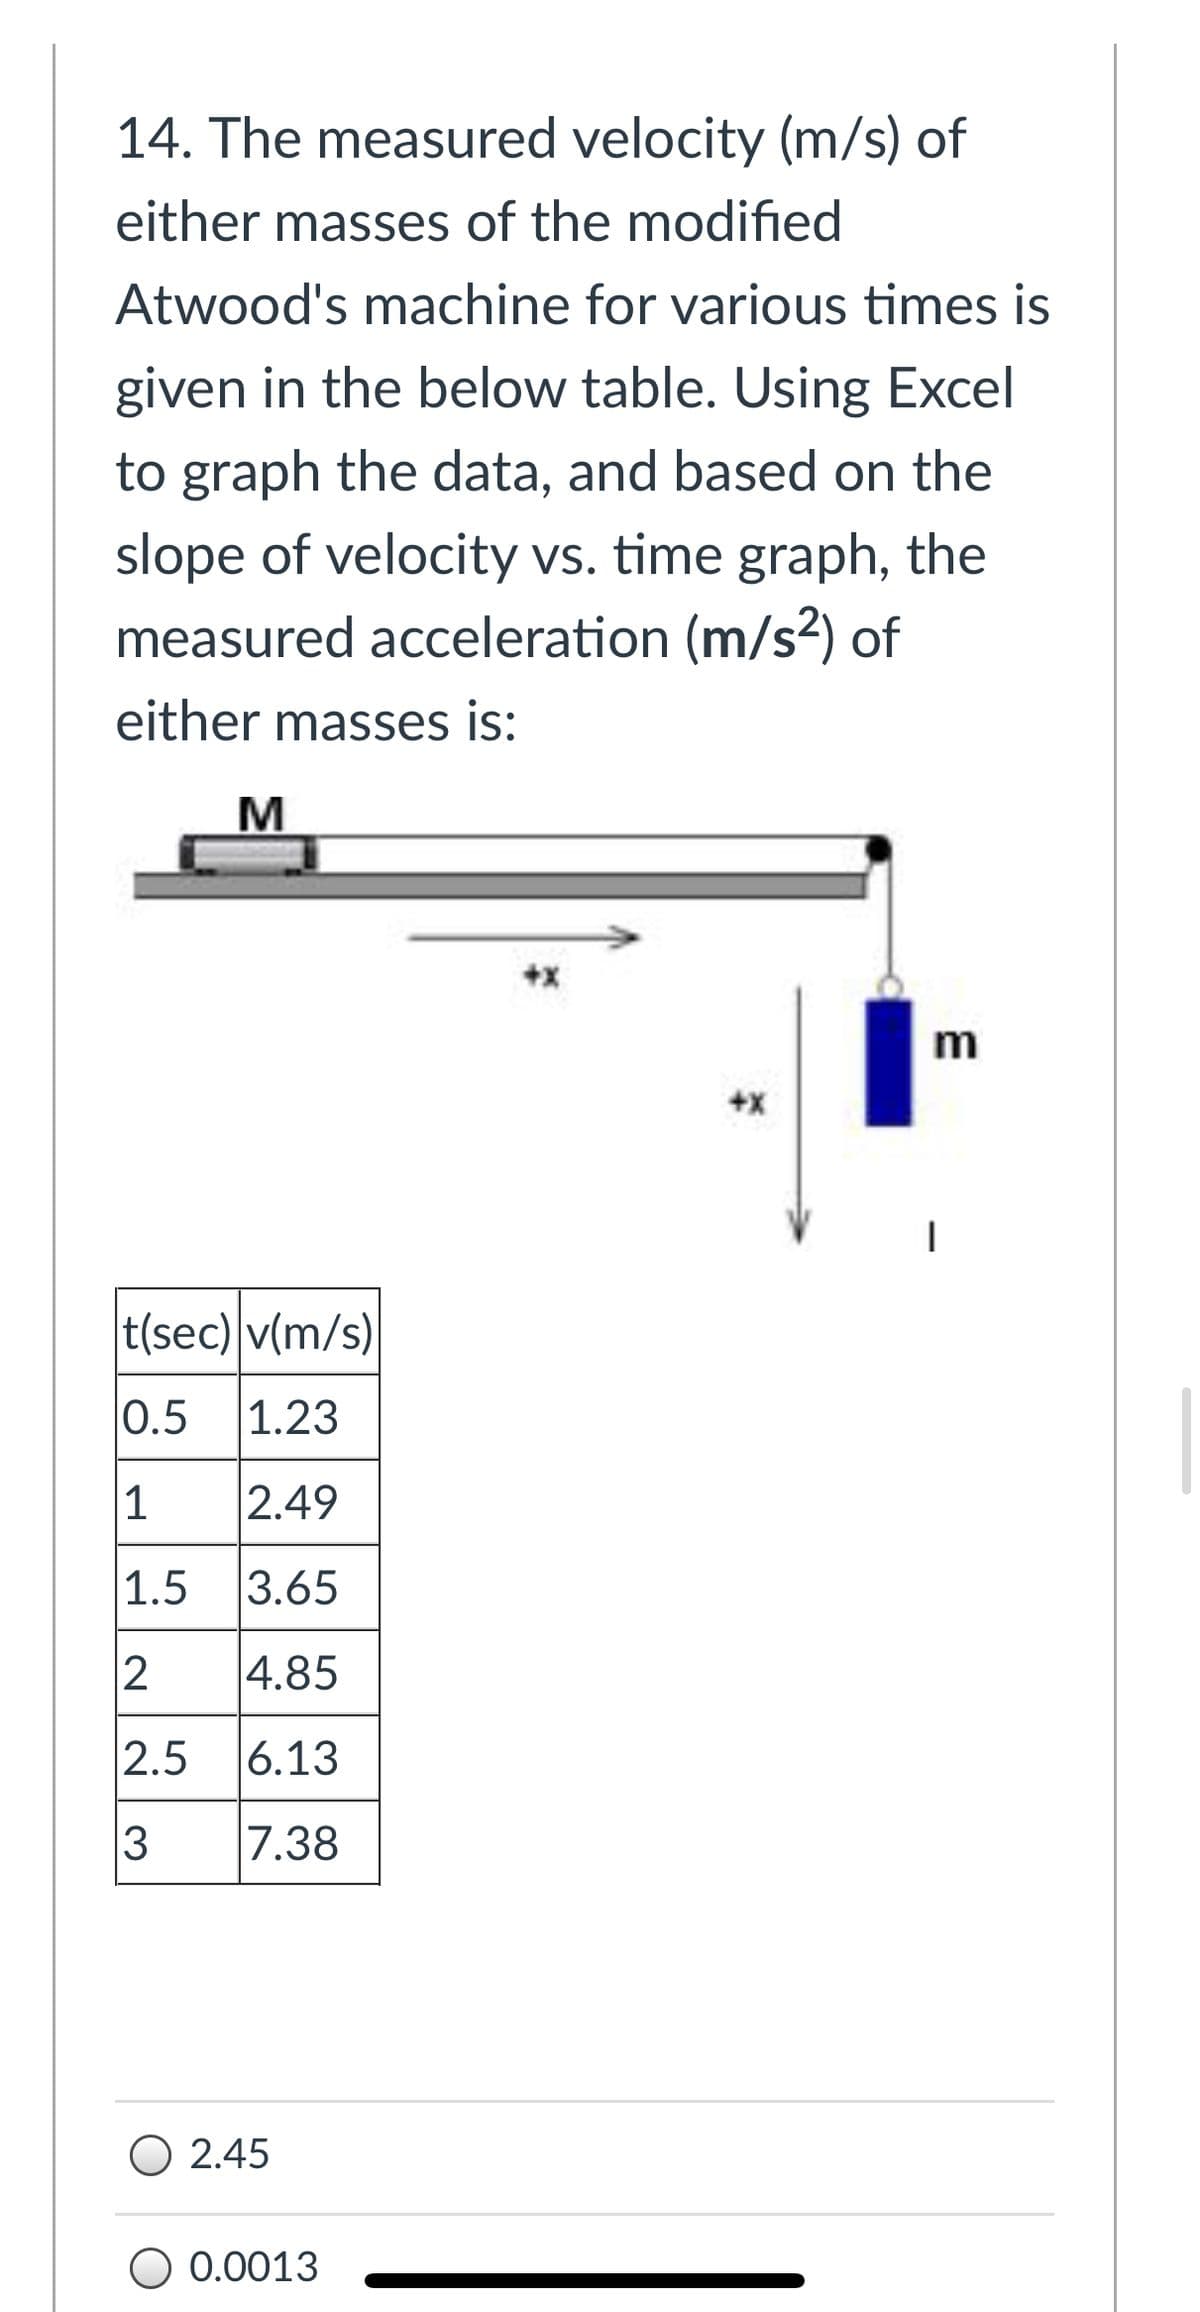 14. The measured velocity (m/s) of
either masses of the modified
Atwood's machine for various times is
given in the below table. Using Excel
to graph the data, and based on the
slope of velocity vs. time graph, the
measured acceleration (m/s2) of
either masses is:
+x
m
+X
t(sec) v(m/s)
0.5
1.23
1
2.49
|1.5
3.65
2
|4.85
2.5
6.13
3
7.38
O 2.45
O 0.0013
